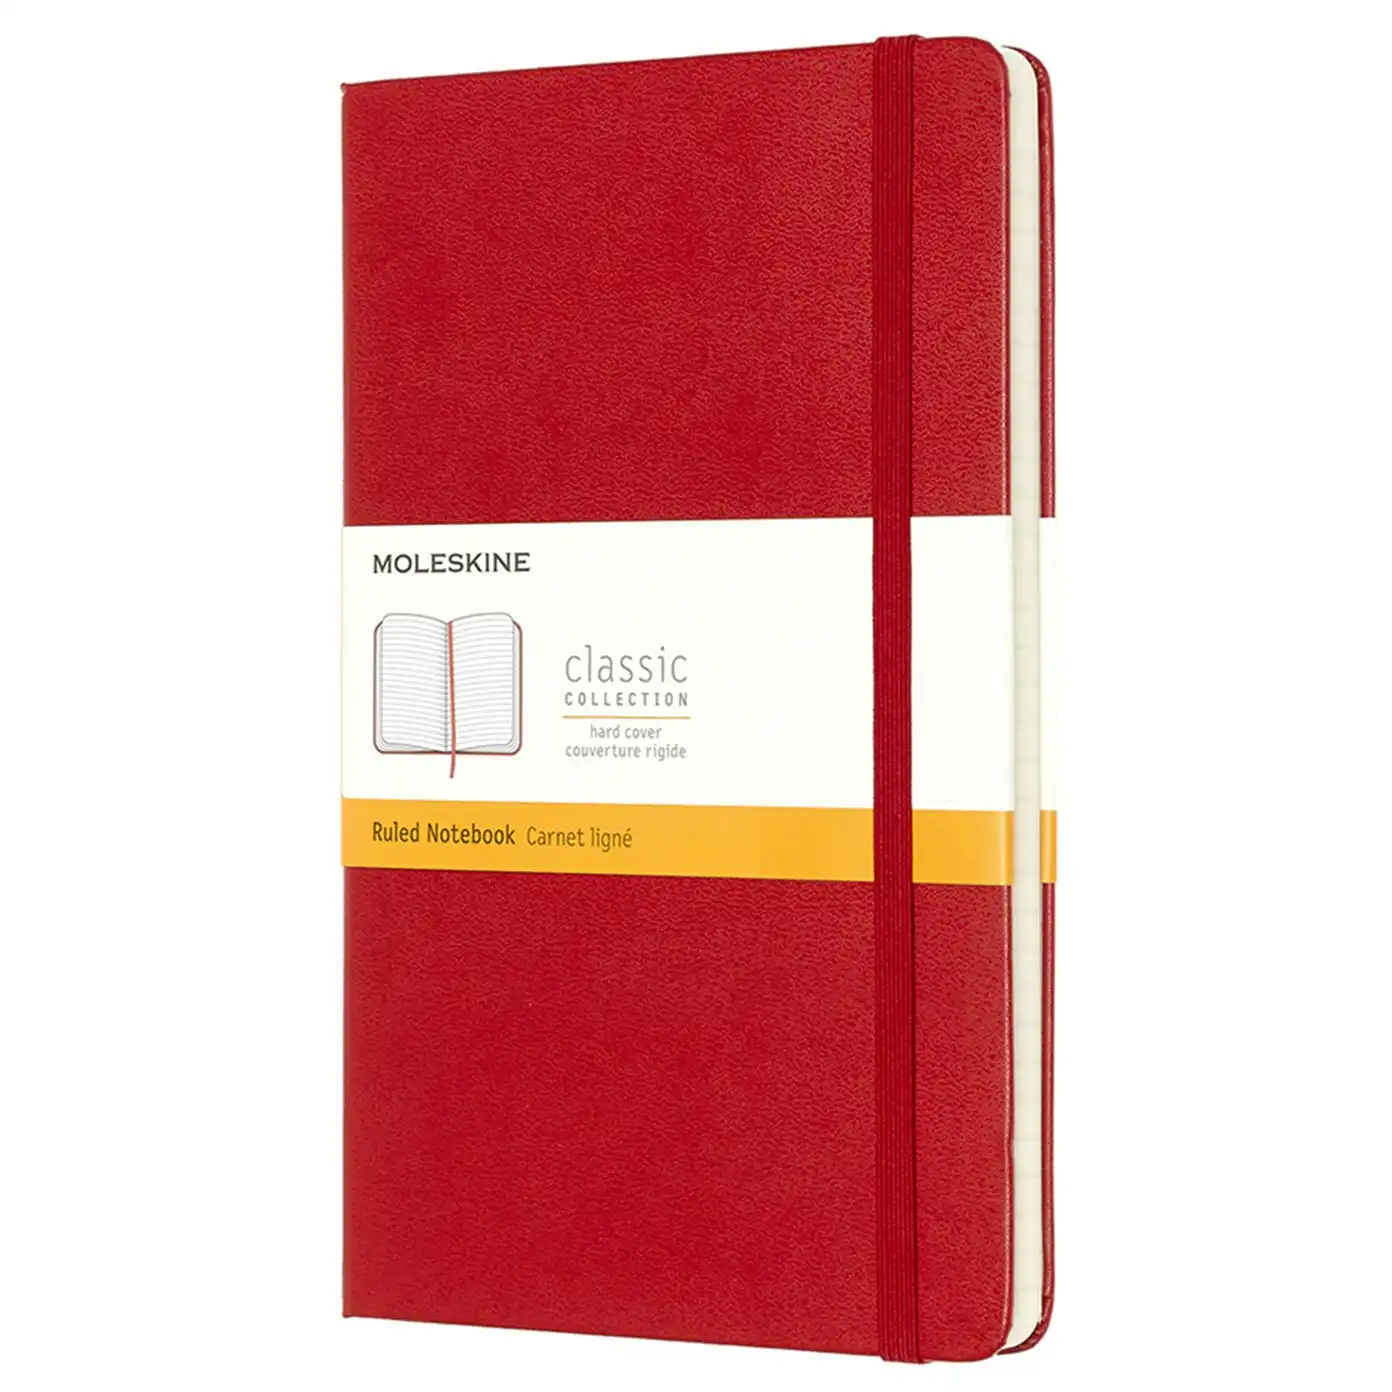 Moleskine Classic Hard Cover Notebook Ruled Office/Student Planner L Scarlet Red